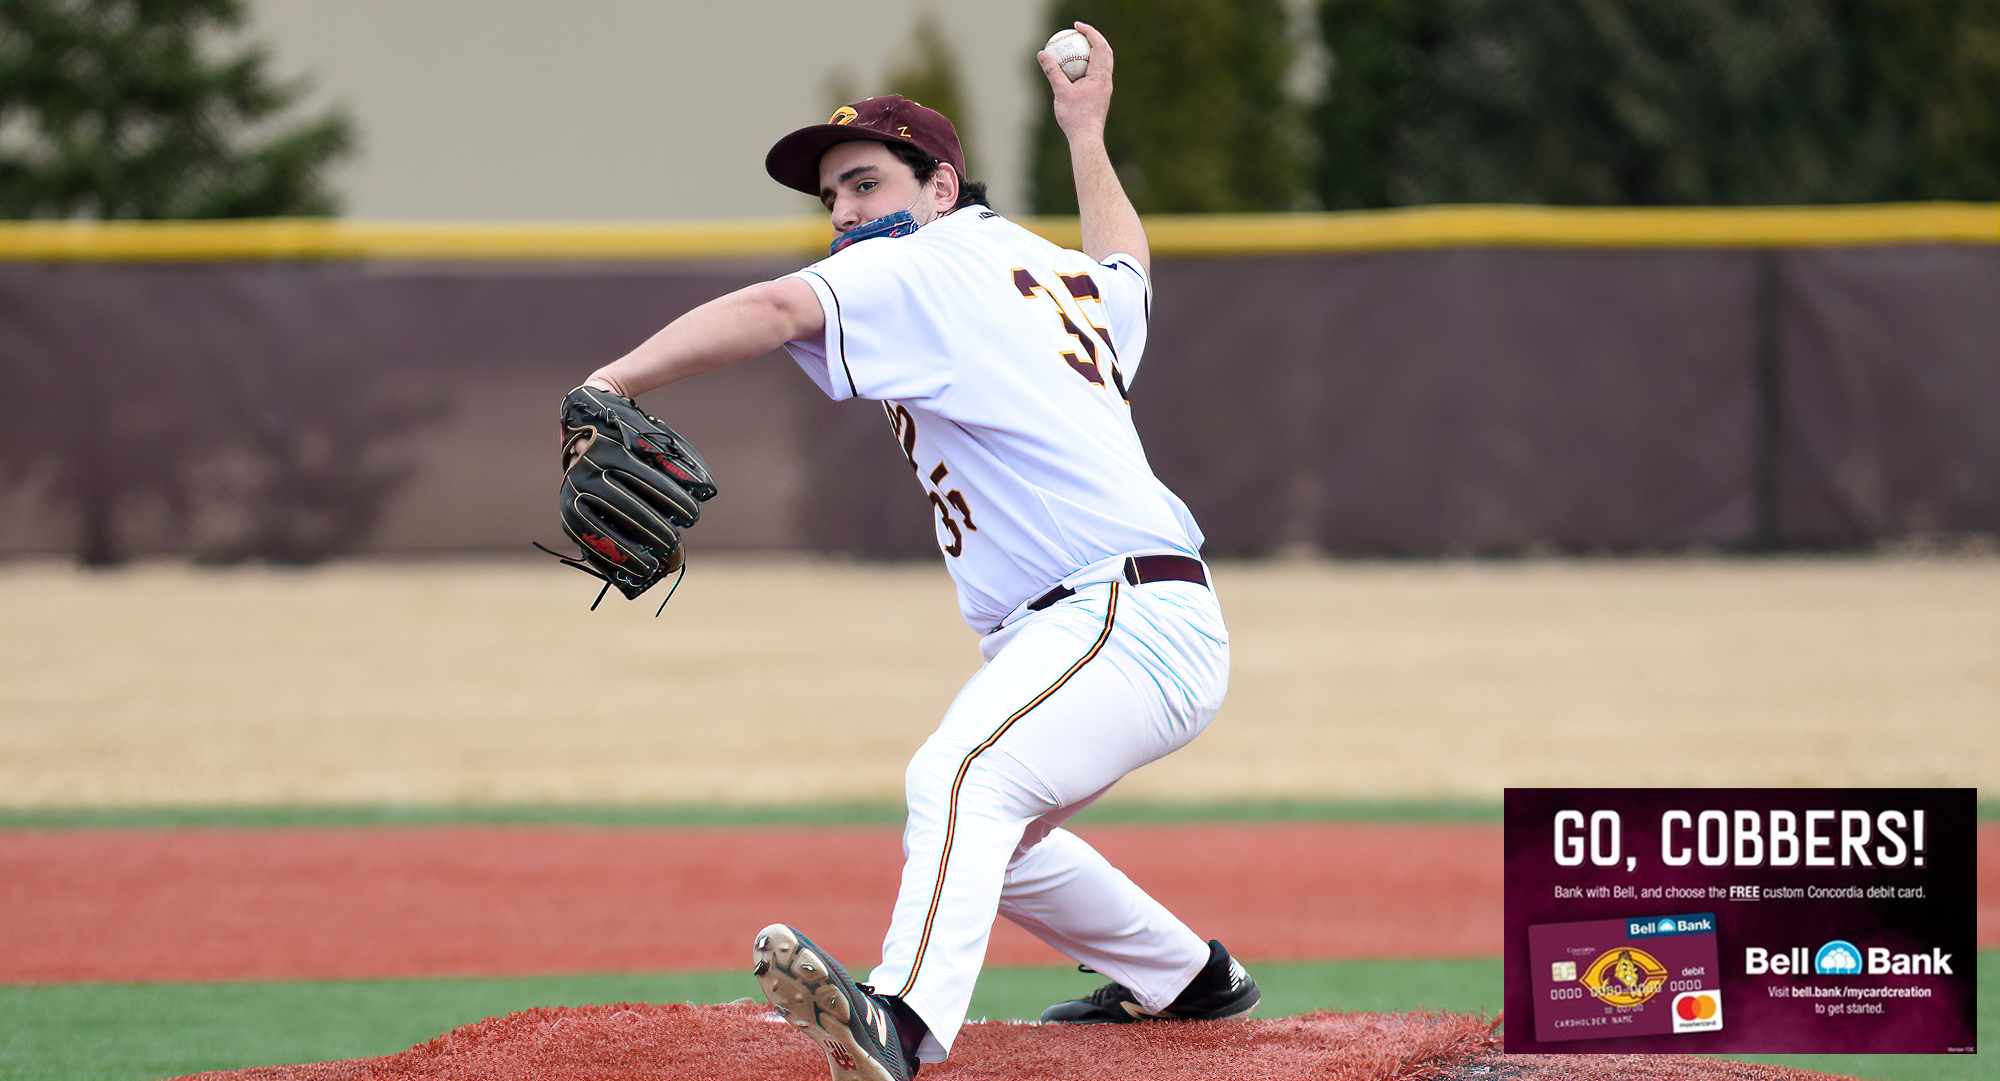 Sophomore Luke Levasseur pitched 5.0 innings in relief and didn't give up a run against league-leading Gustavus. He earned his first win of the year.